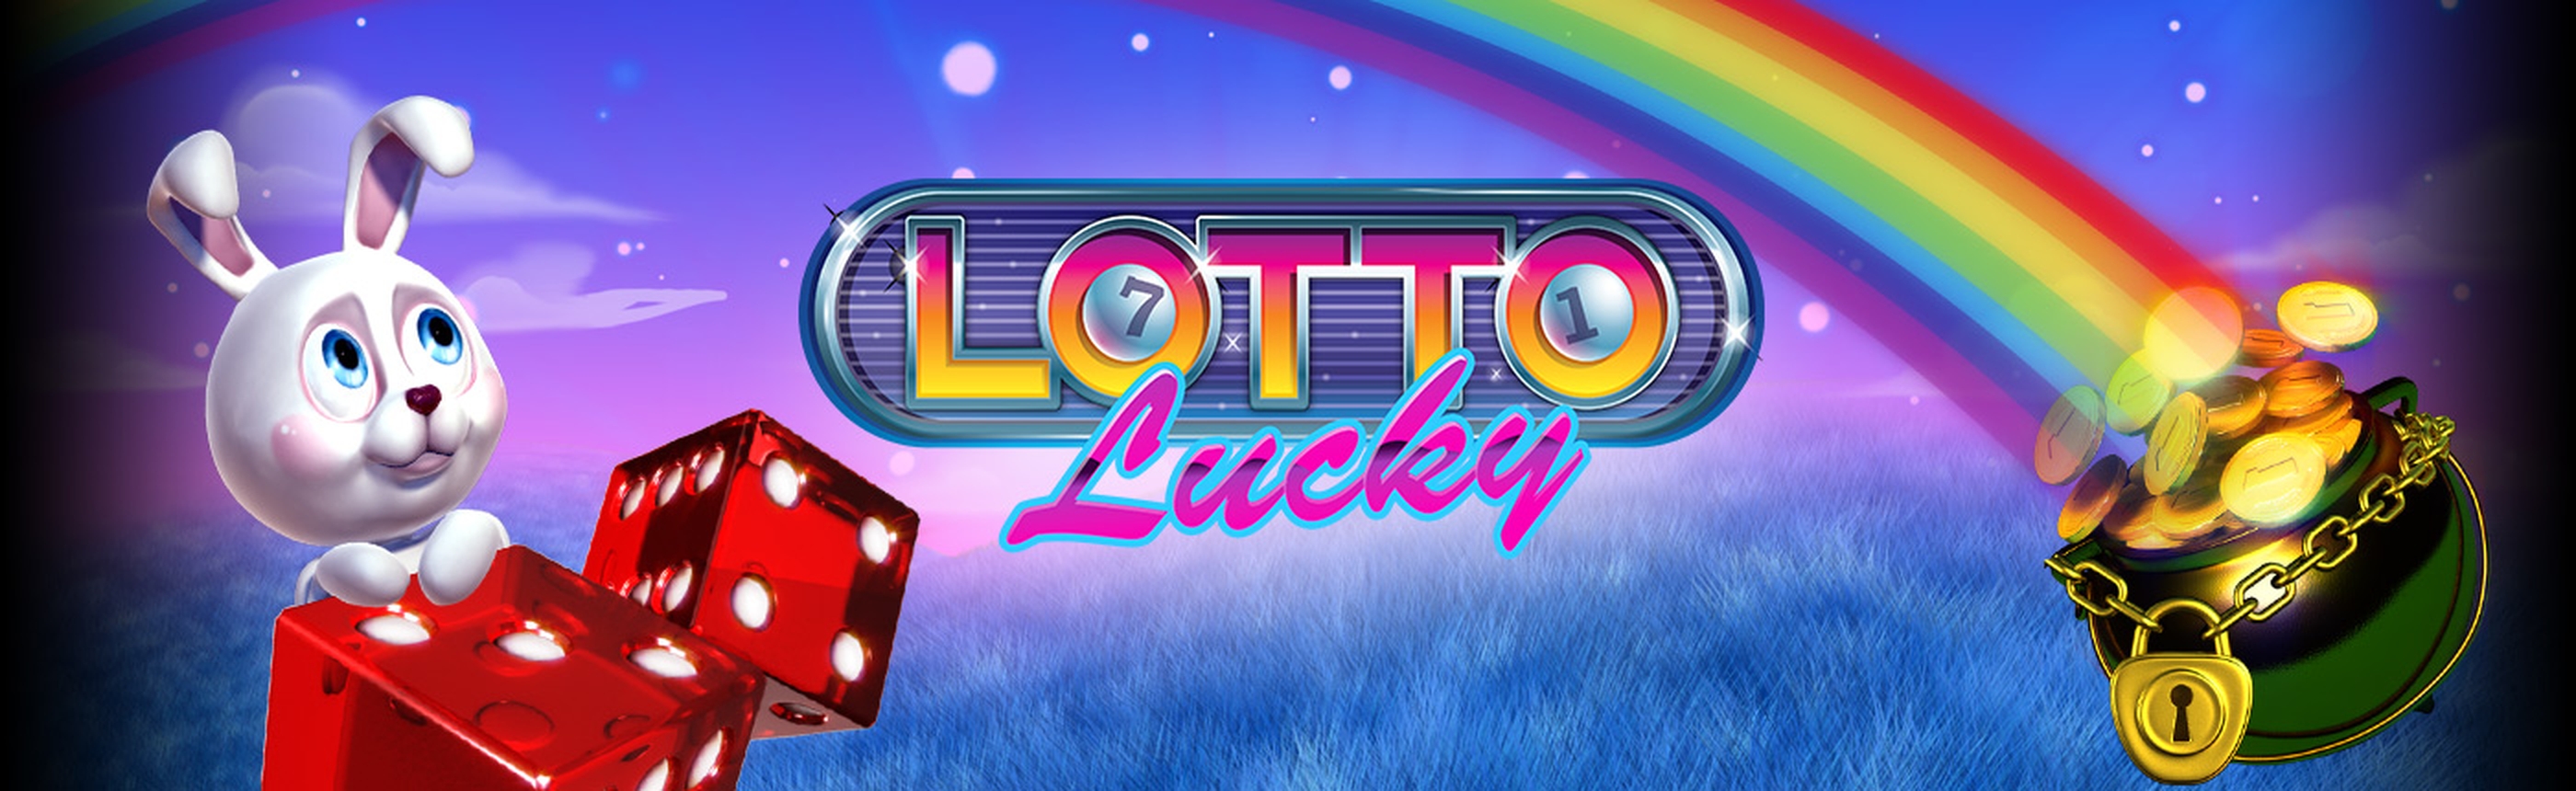 The Lotto Lucky Online Slot Demo Game by Revolver Gaming